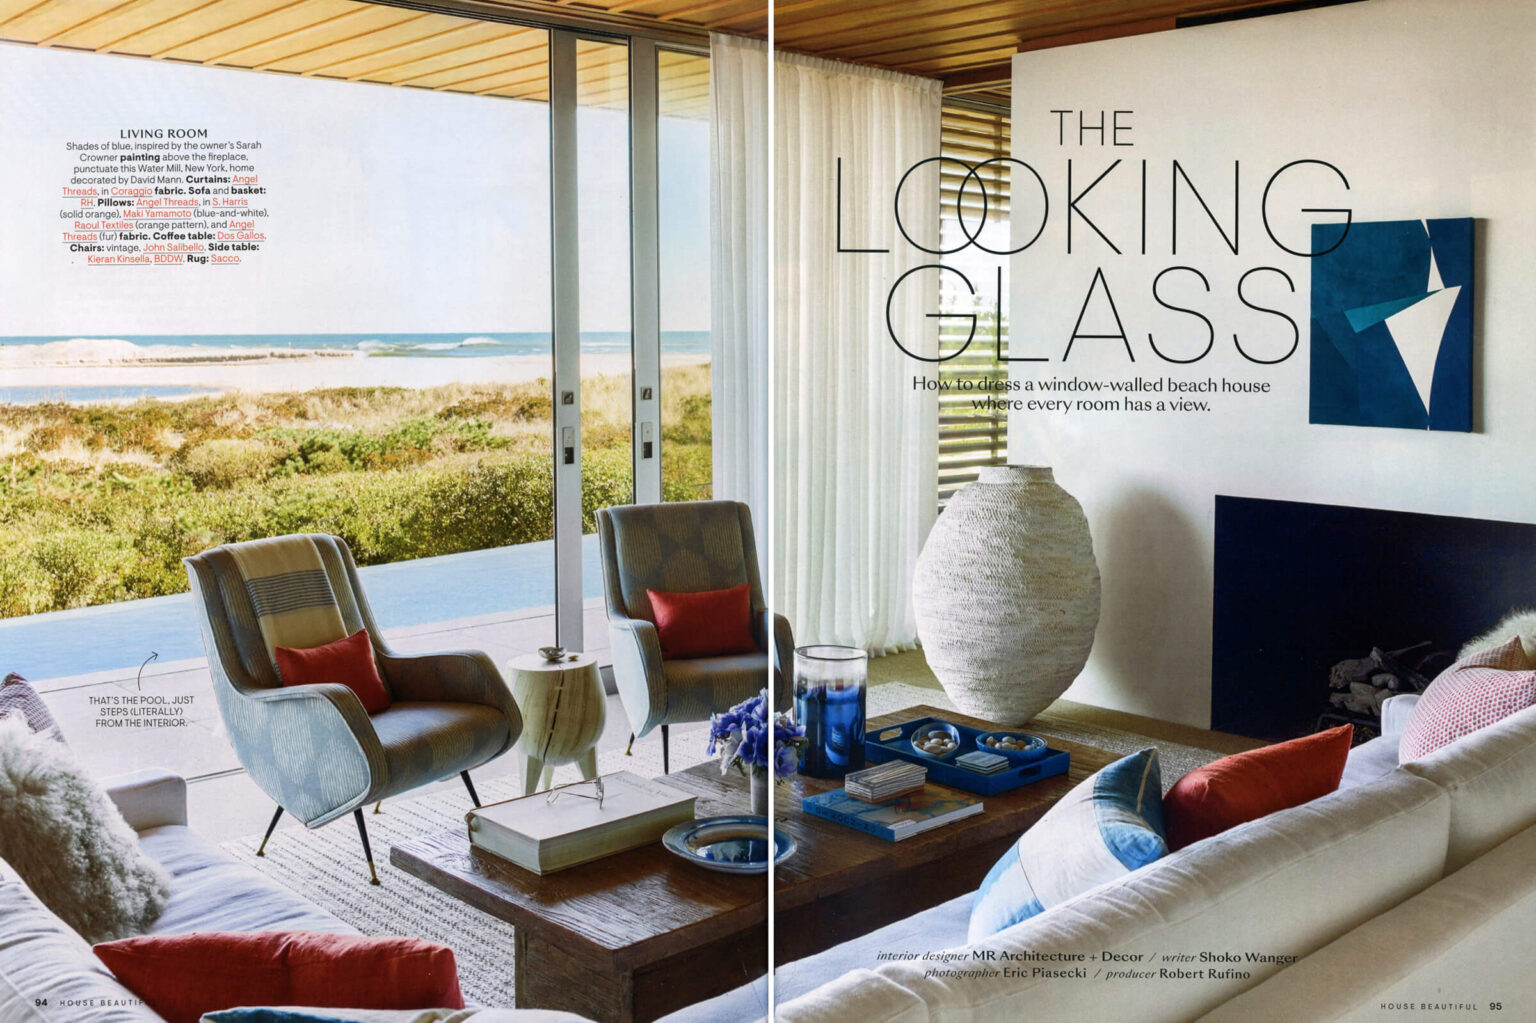 A double page spread of an article titled The Looking Glass of a beach house by MR Architecture + Decor in House Beautiful magazine.